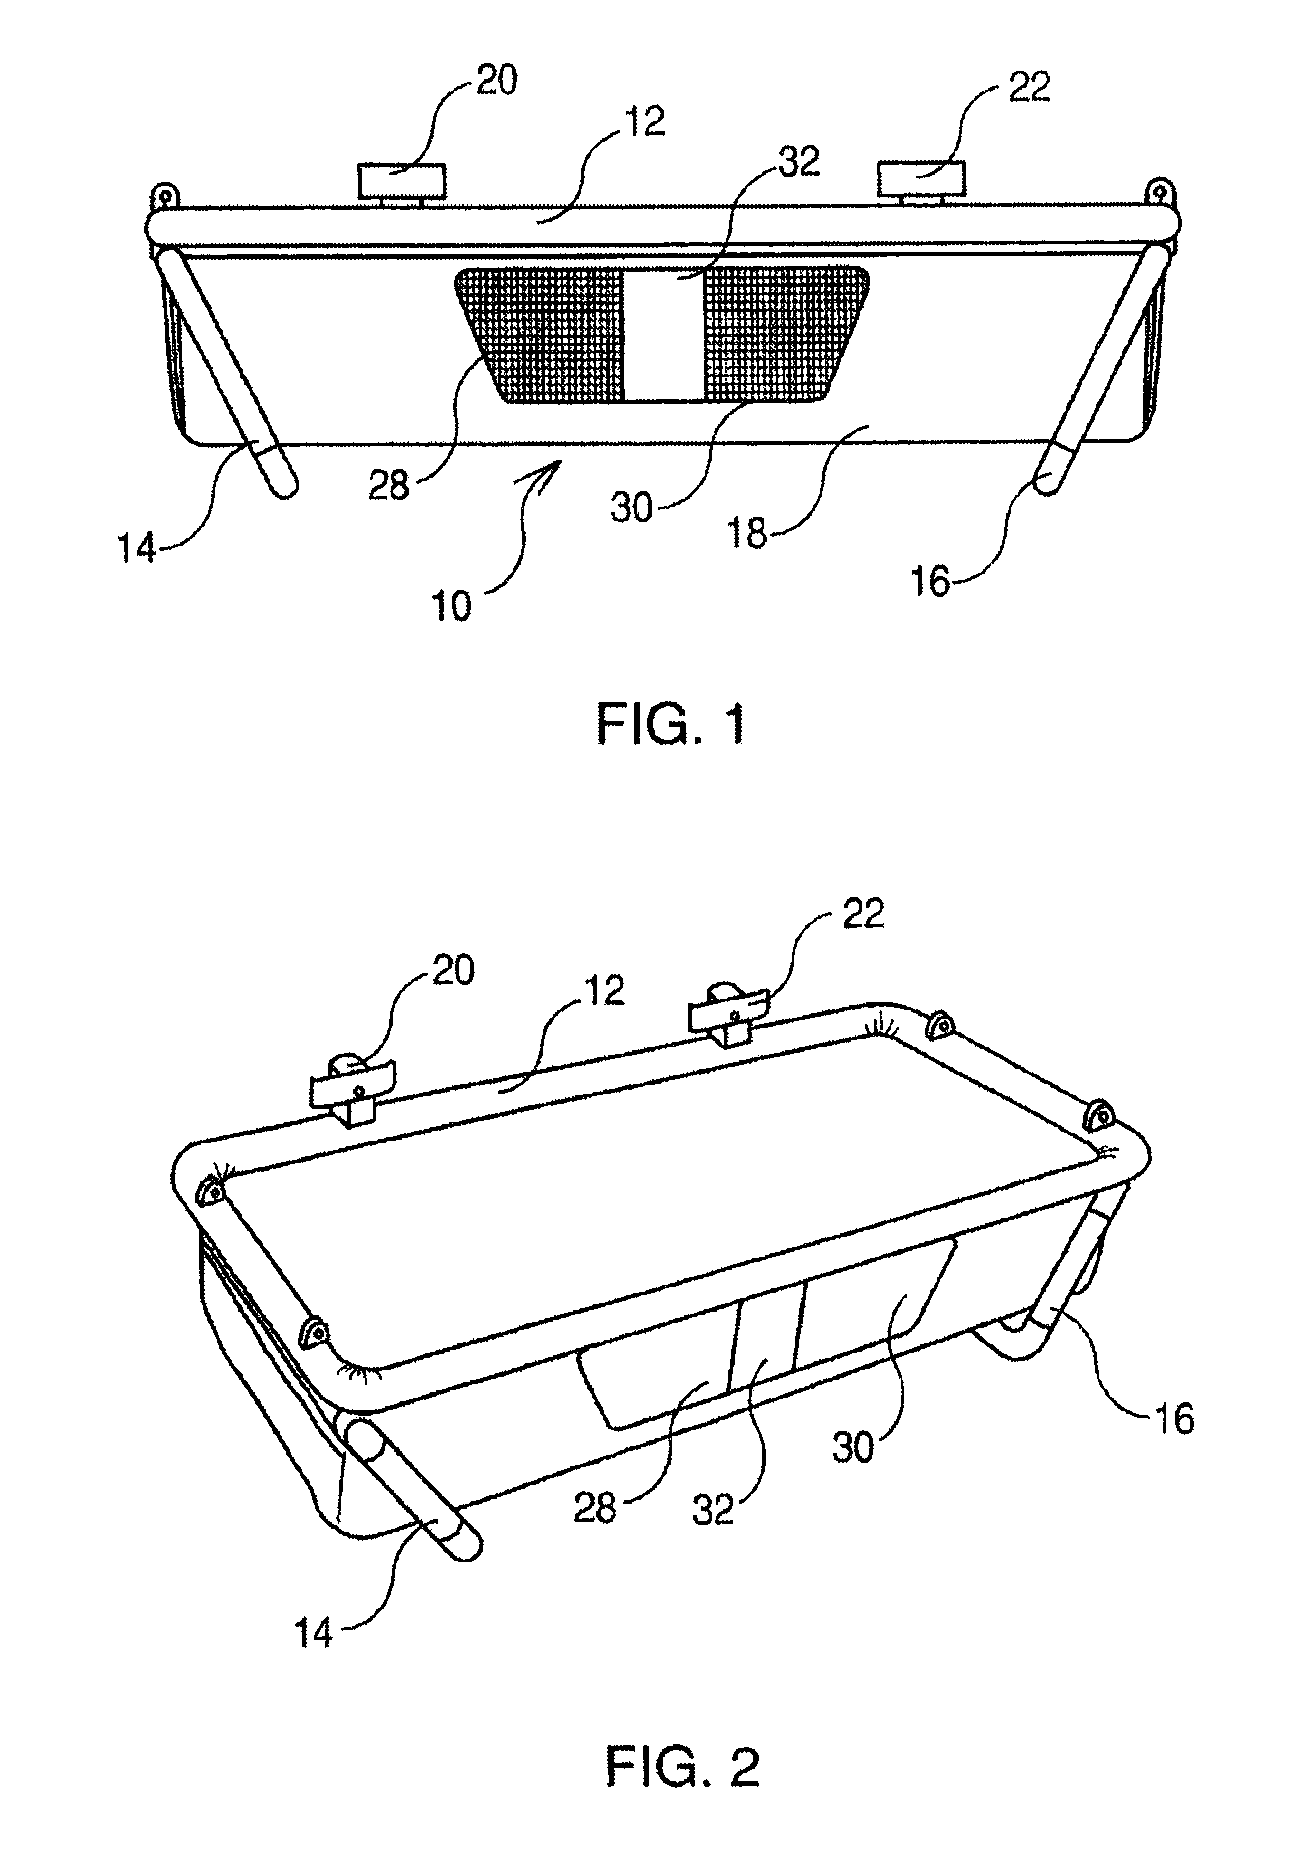 Cradle adaptable to an aircraft seat